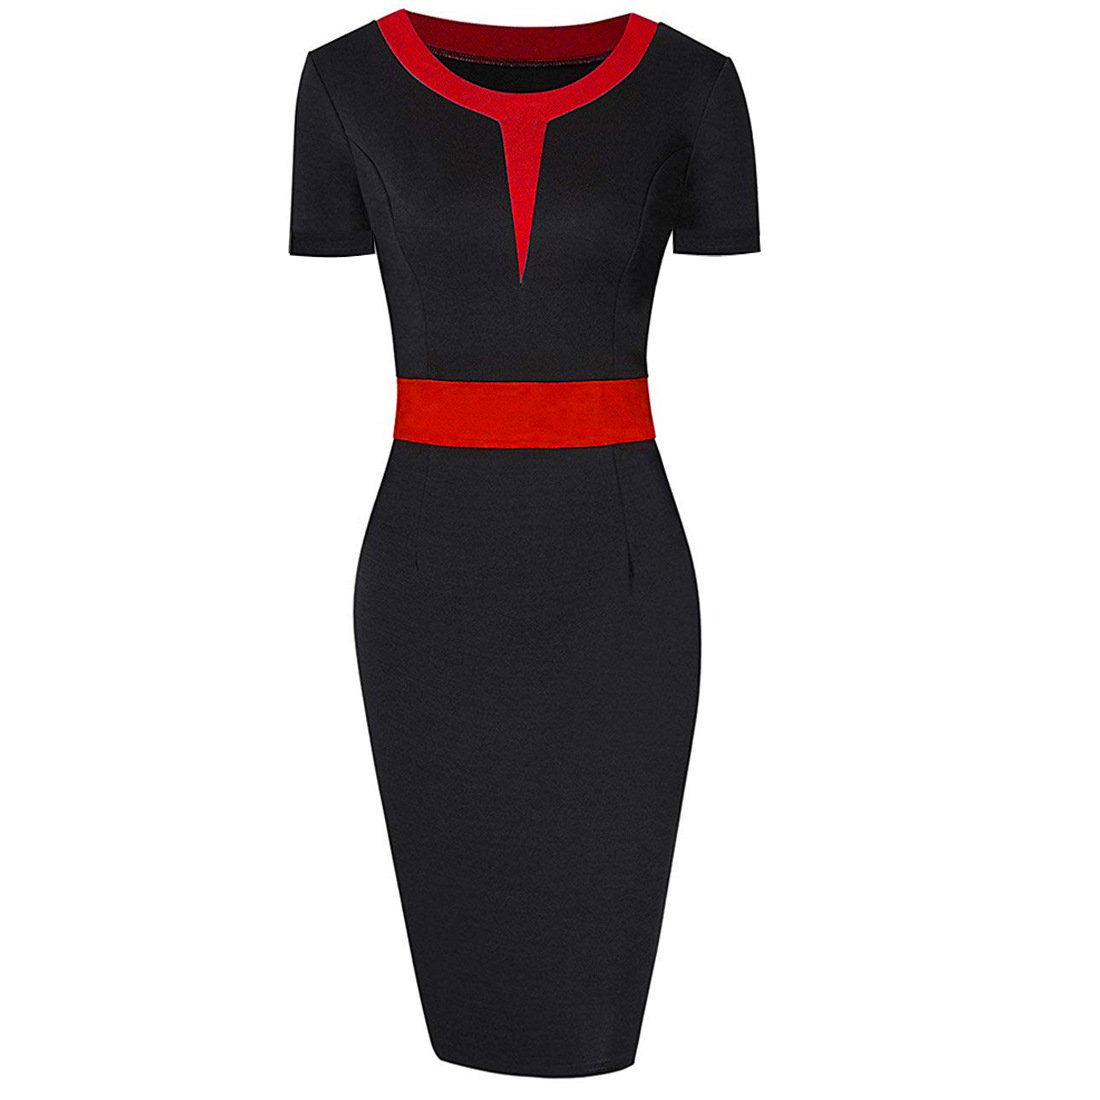  Women Pencil Dress Patchwork Contrast Color Short Sleeve Work Office Bodycon Party Dress red